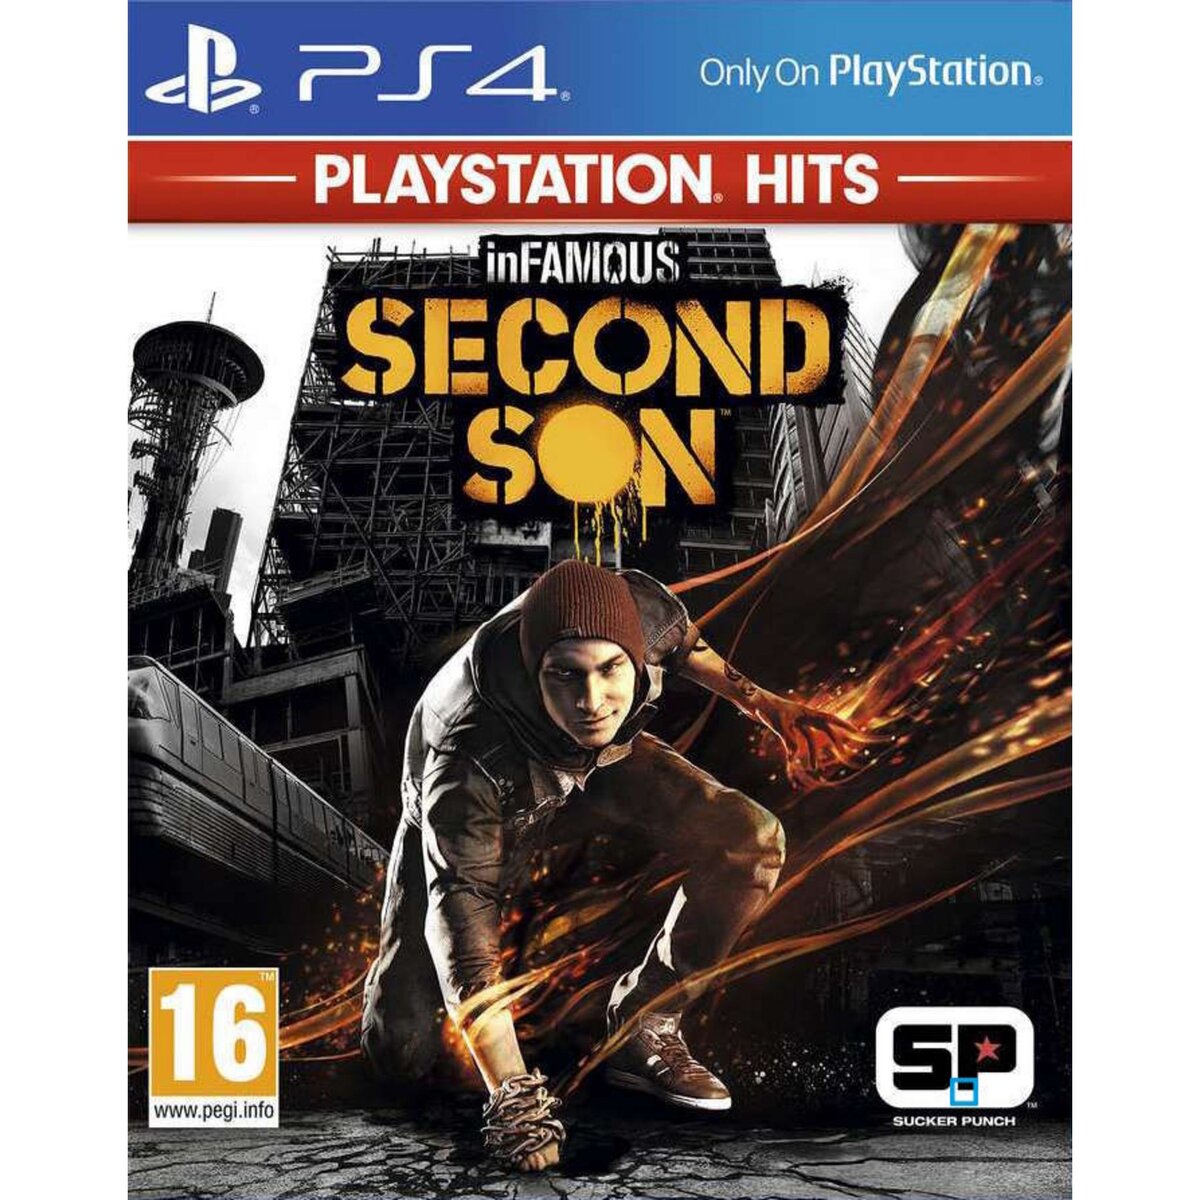 Infamous : Second son Playstation hits PS4